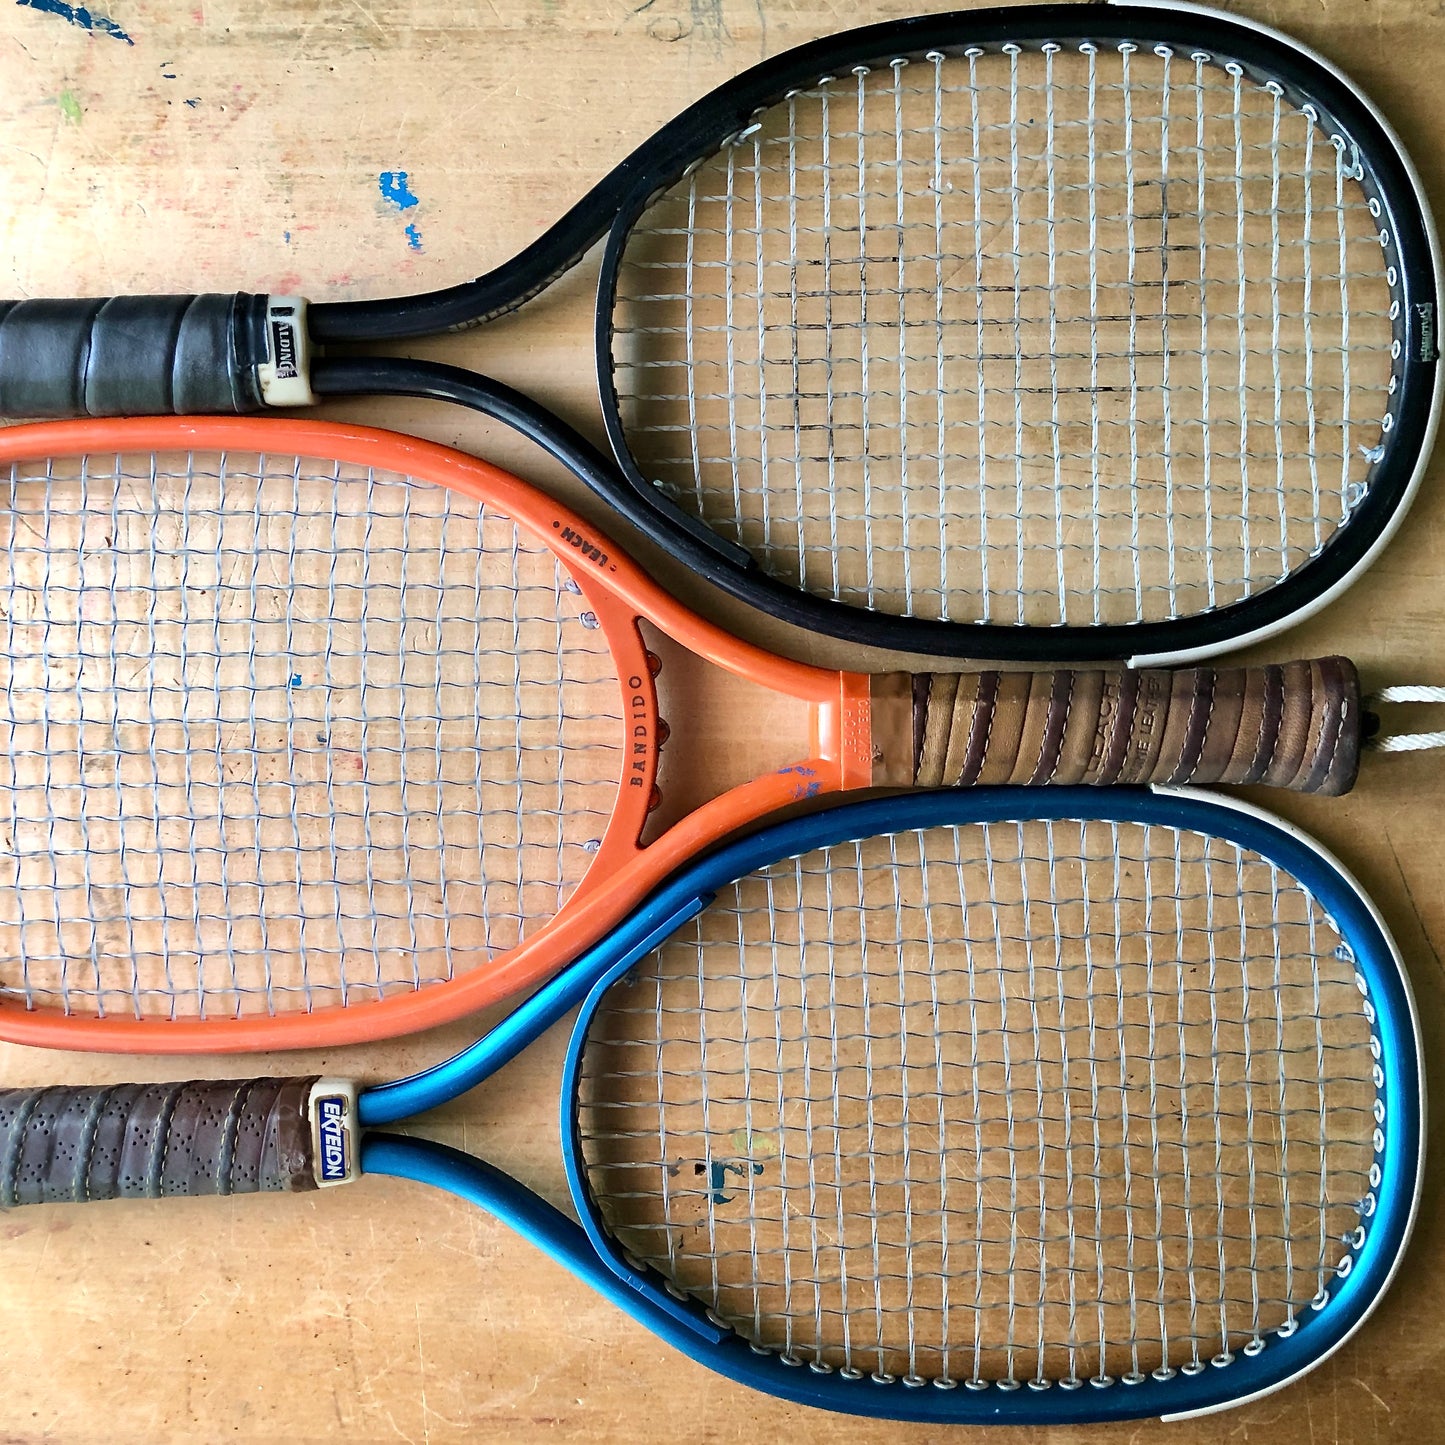 Vintage Racquetball Racquets, Set of Three (c.1970s+)